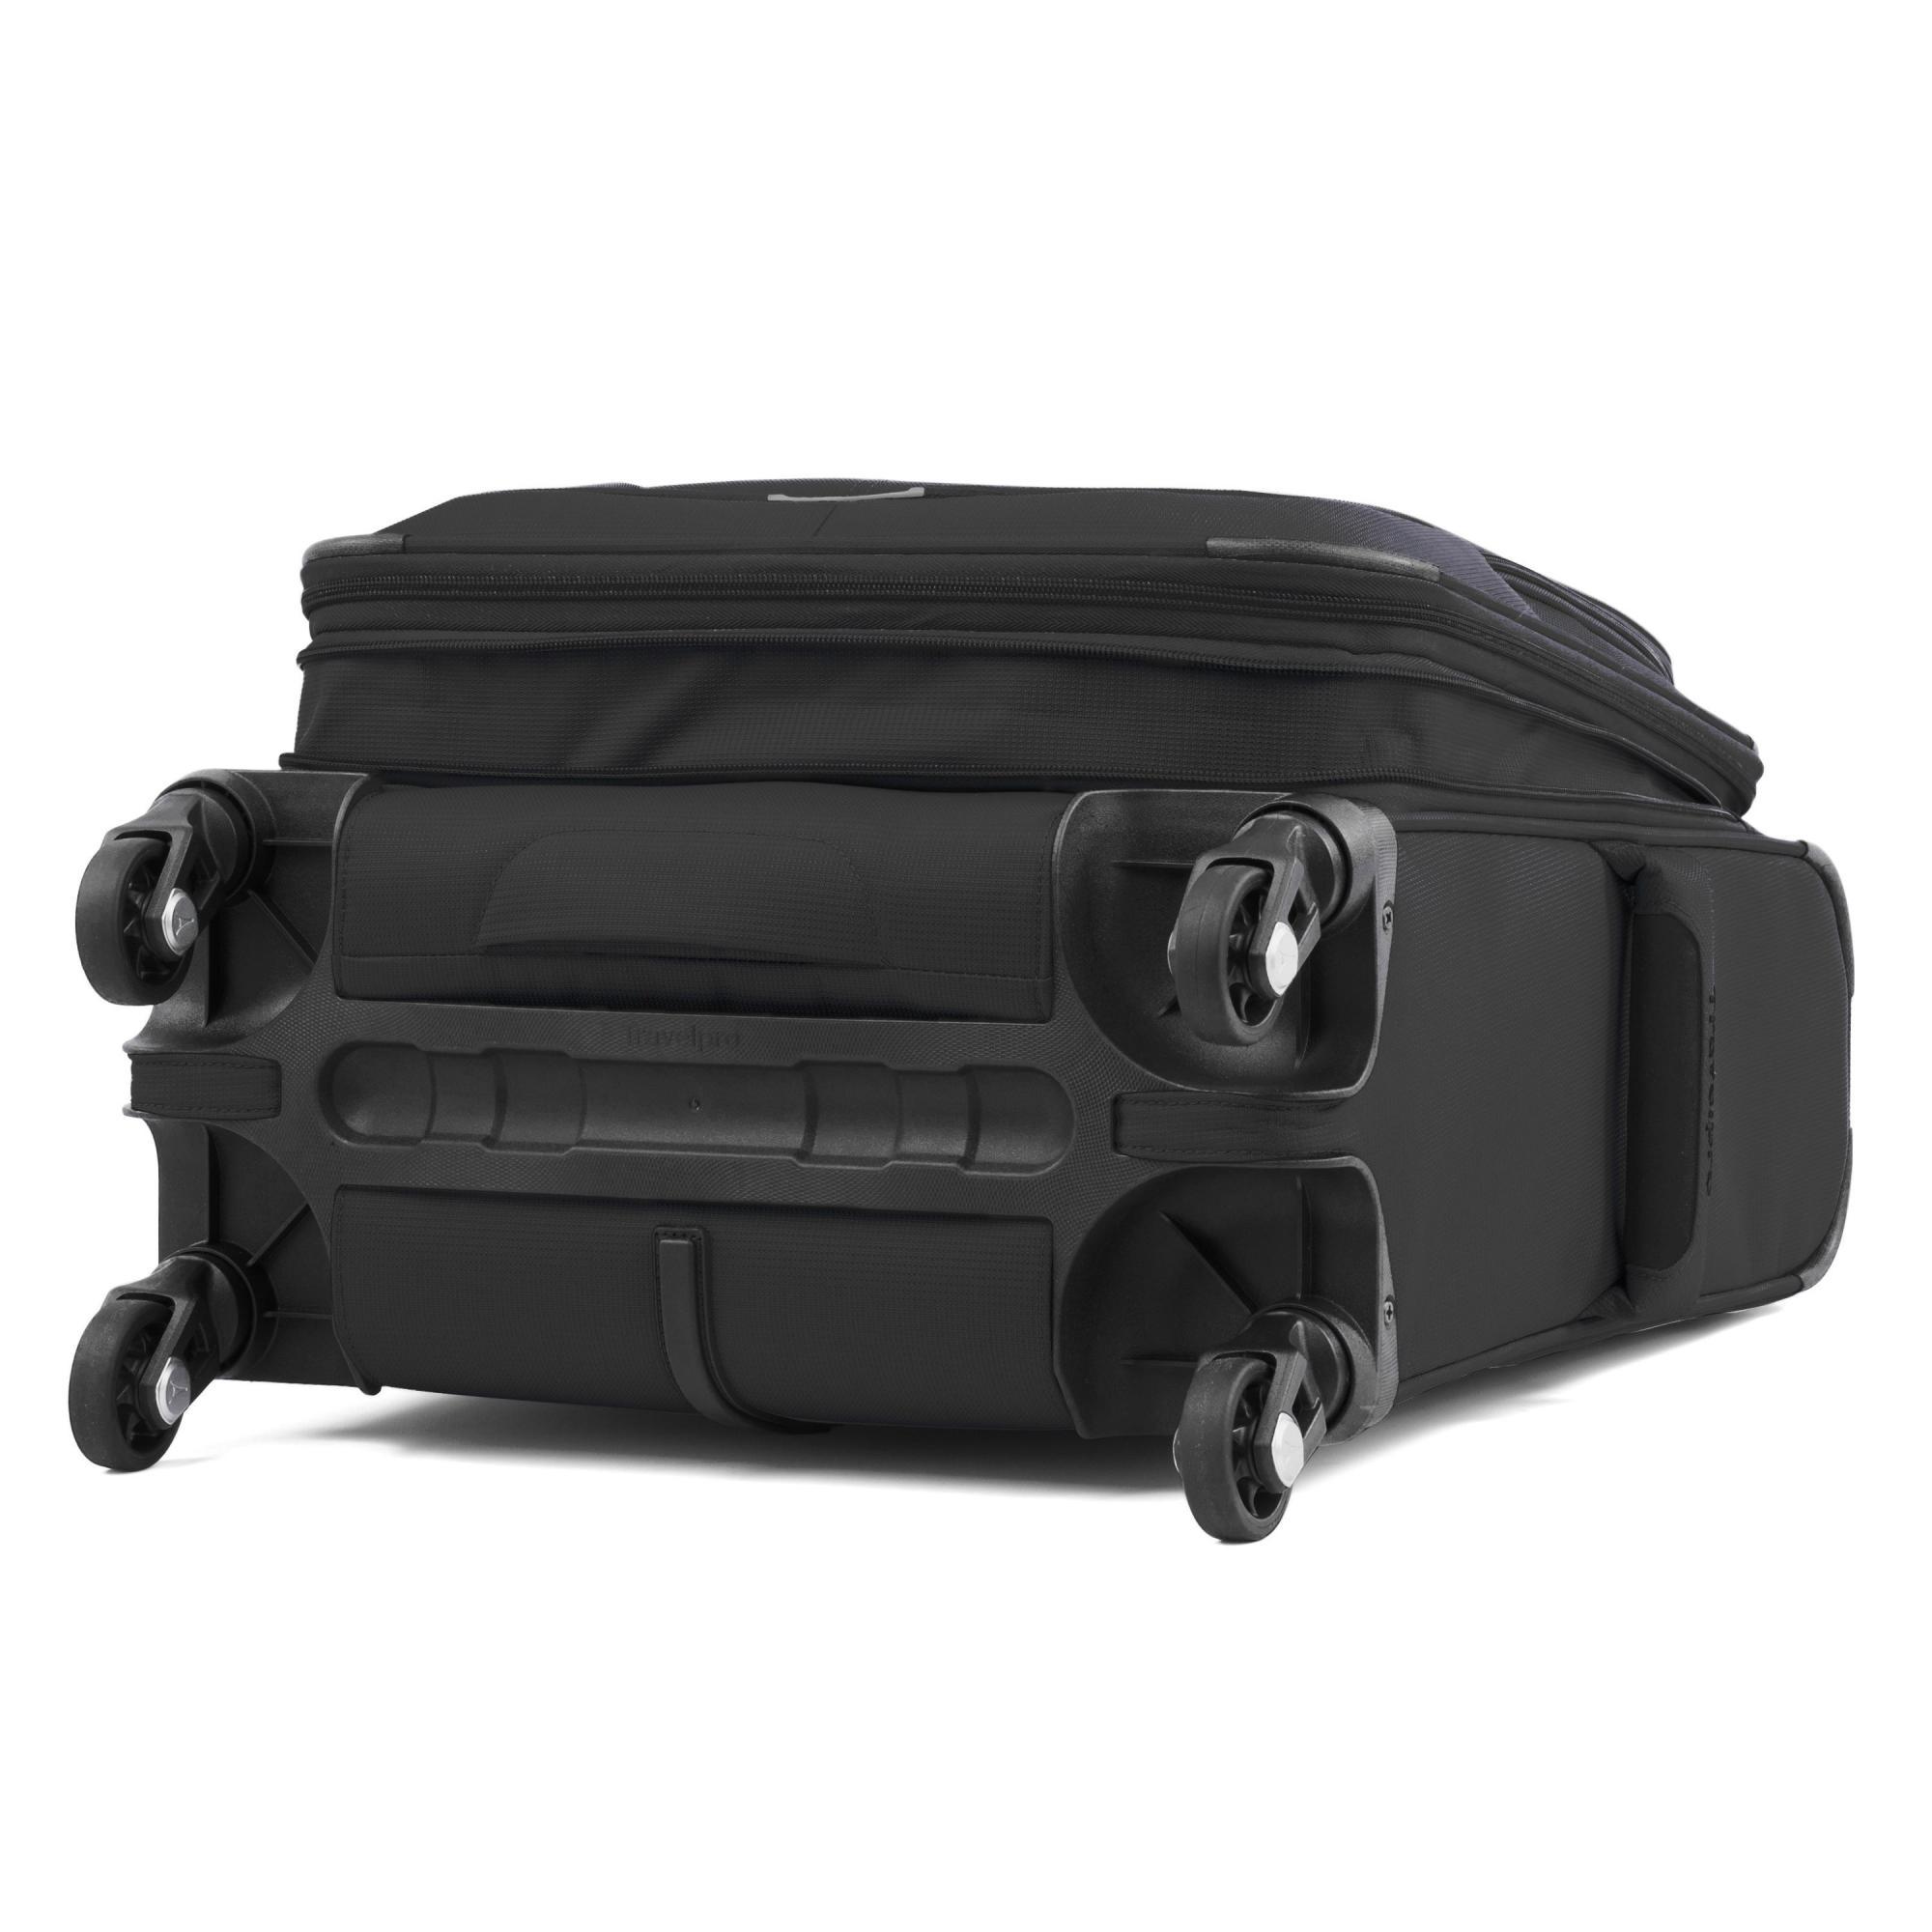 Travelpro Maxlite 5 International Expandable Carry on Spinner